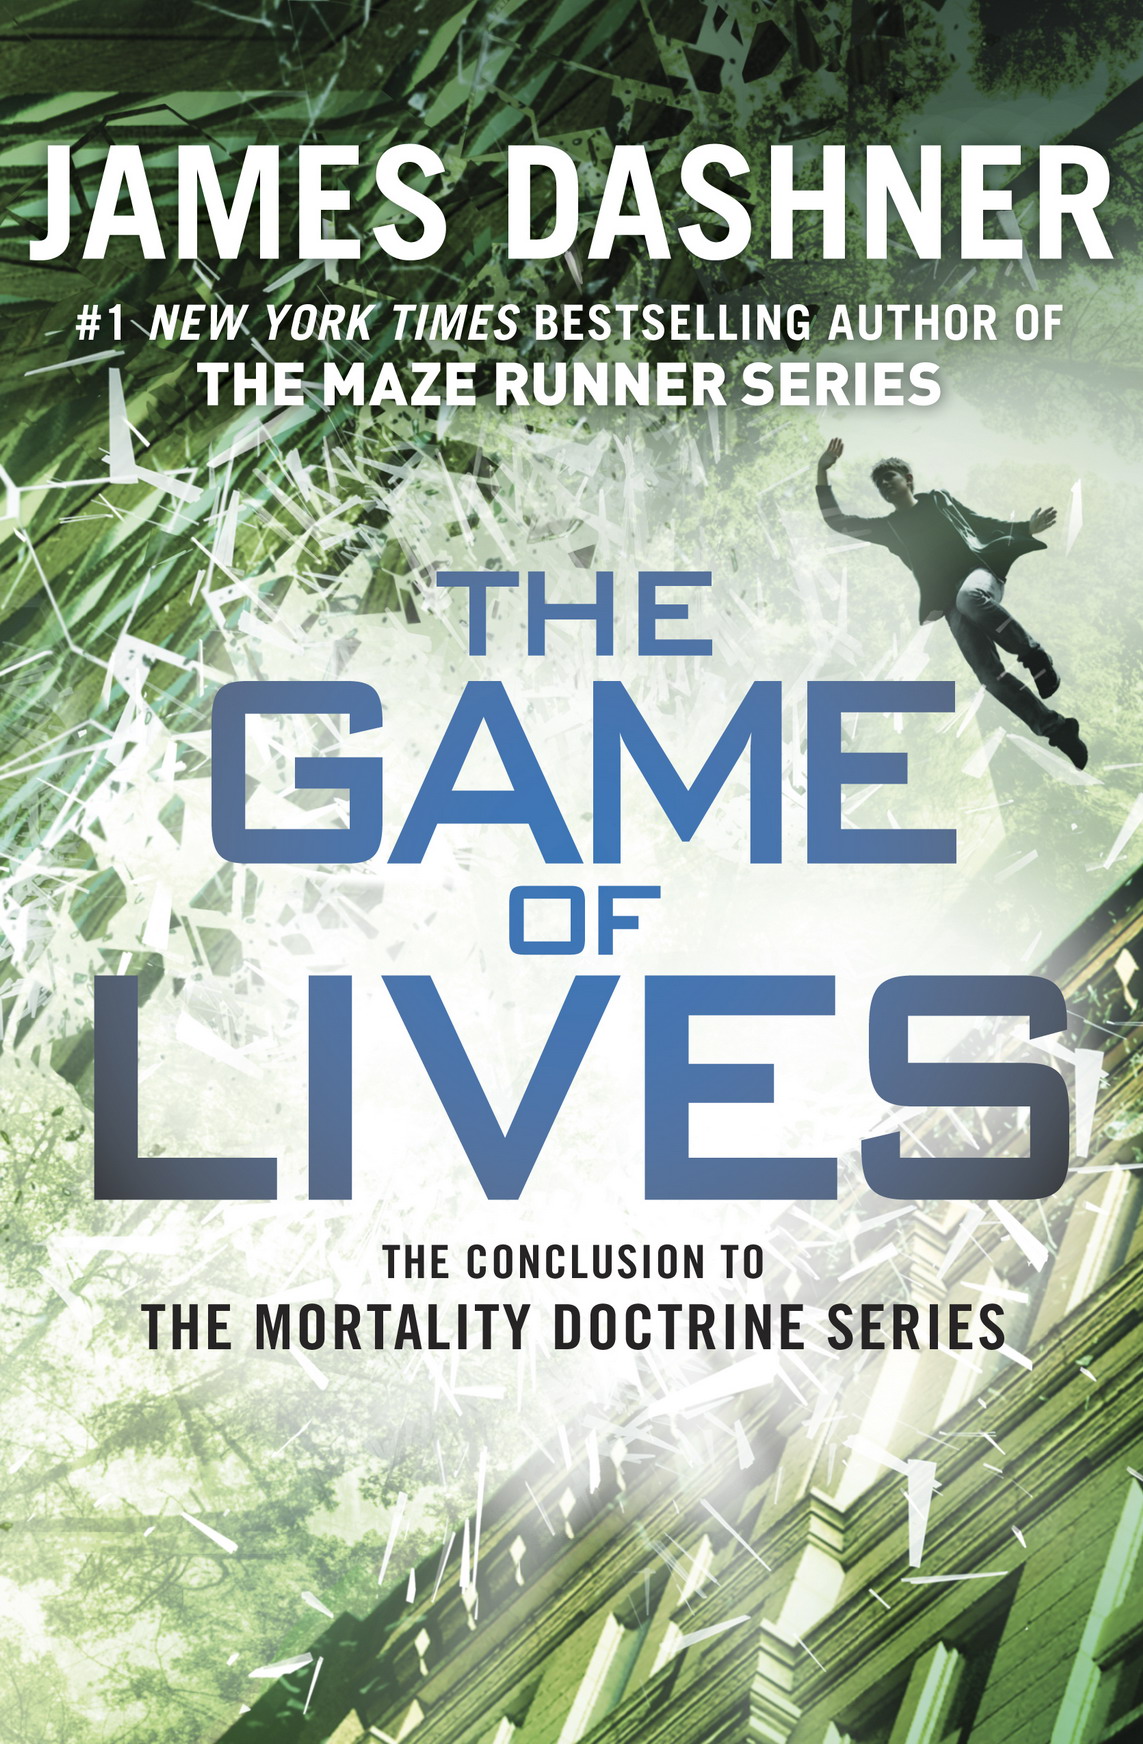 The Game of Lives (2015) by James Dashner